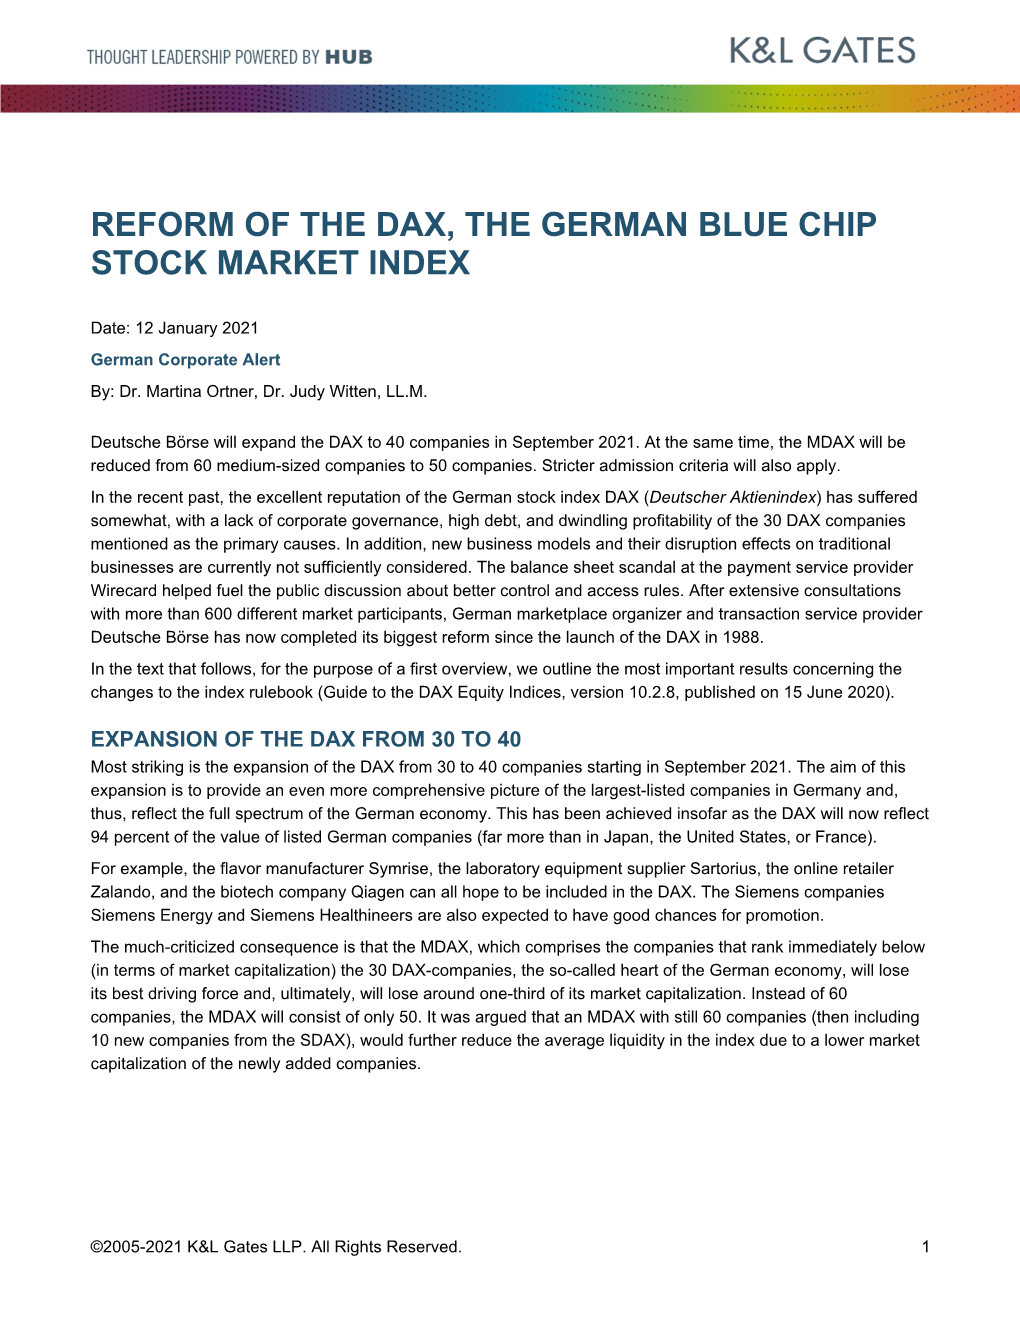 Reform of the Dax, the German Blue Chip Stock Market Index